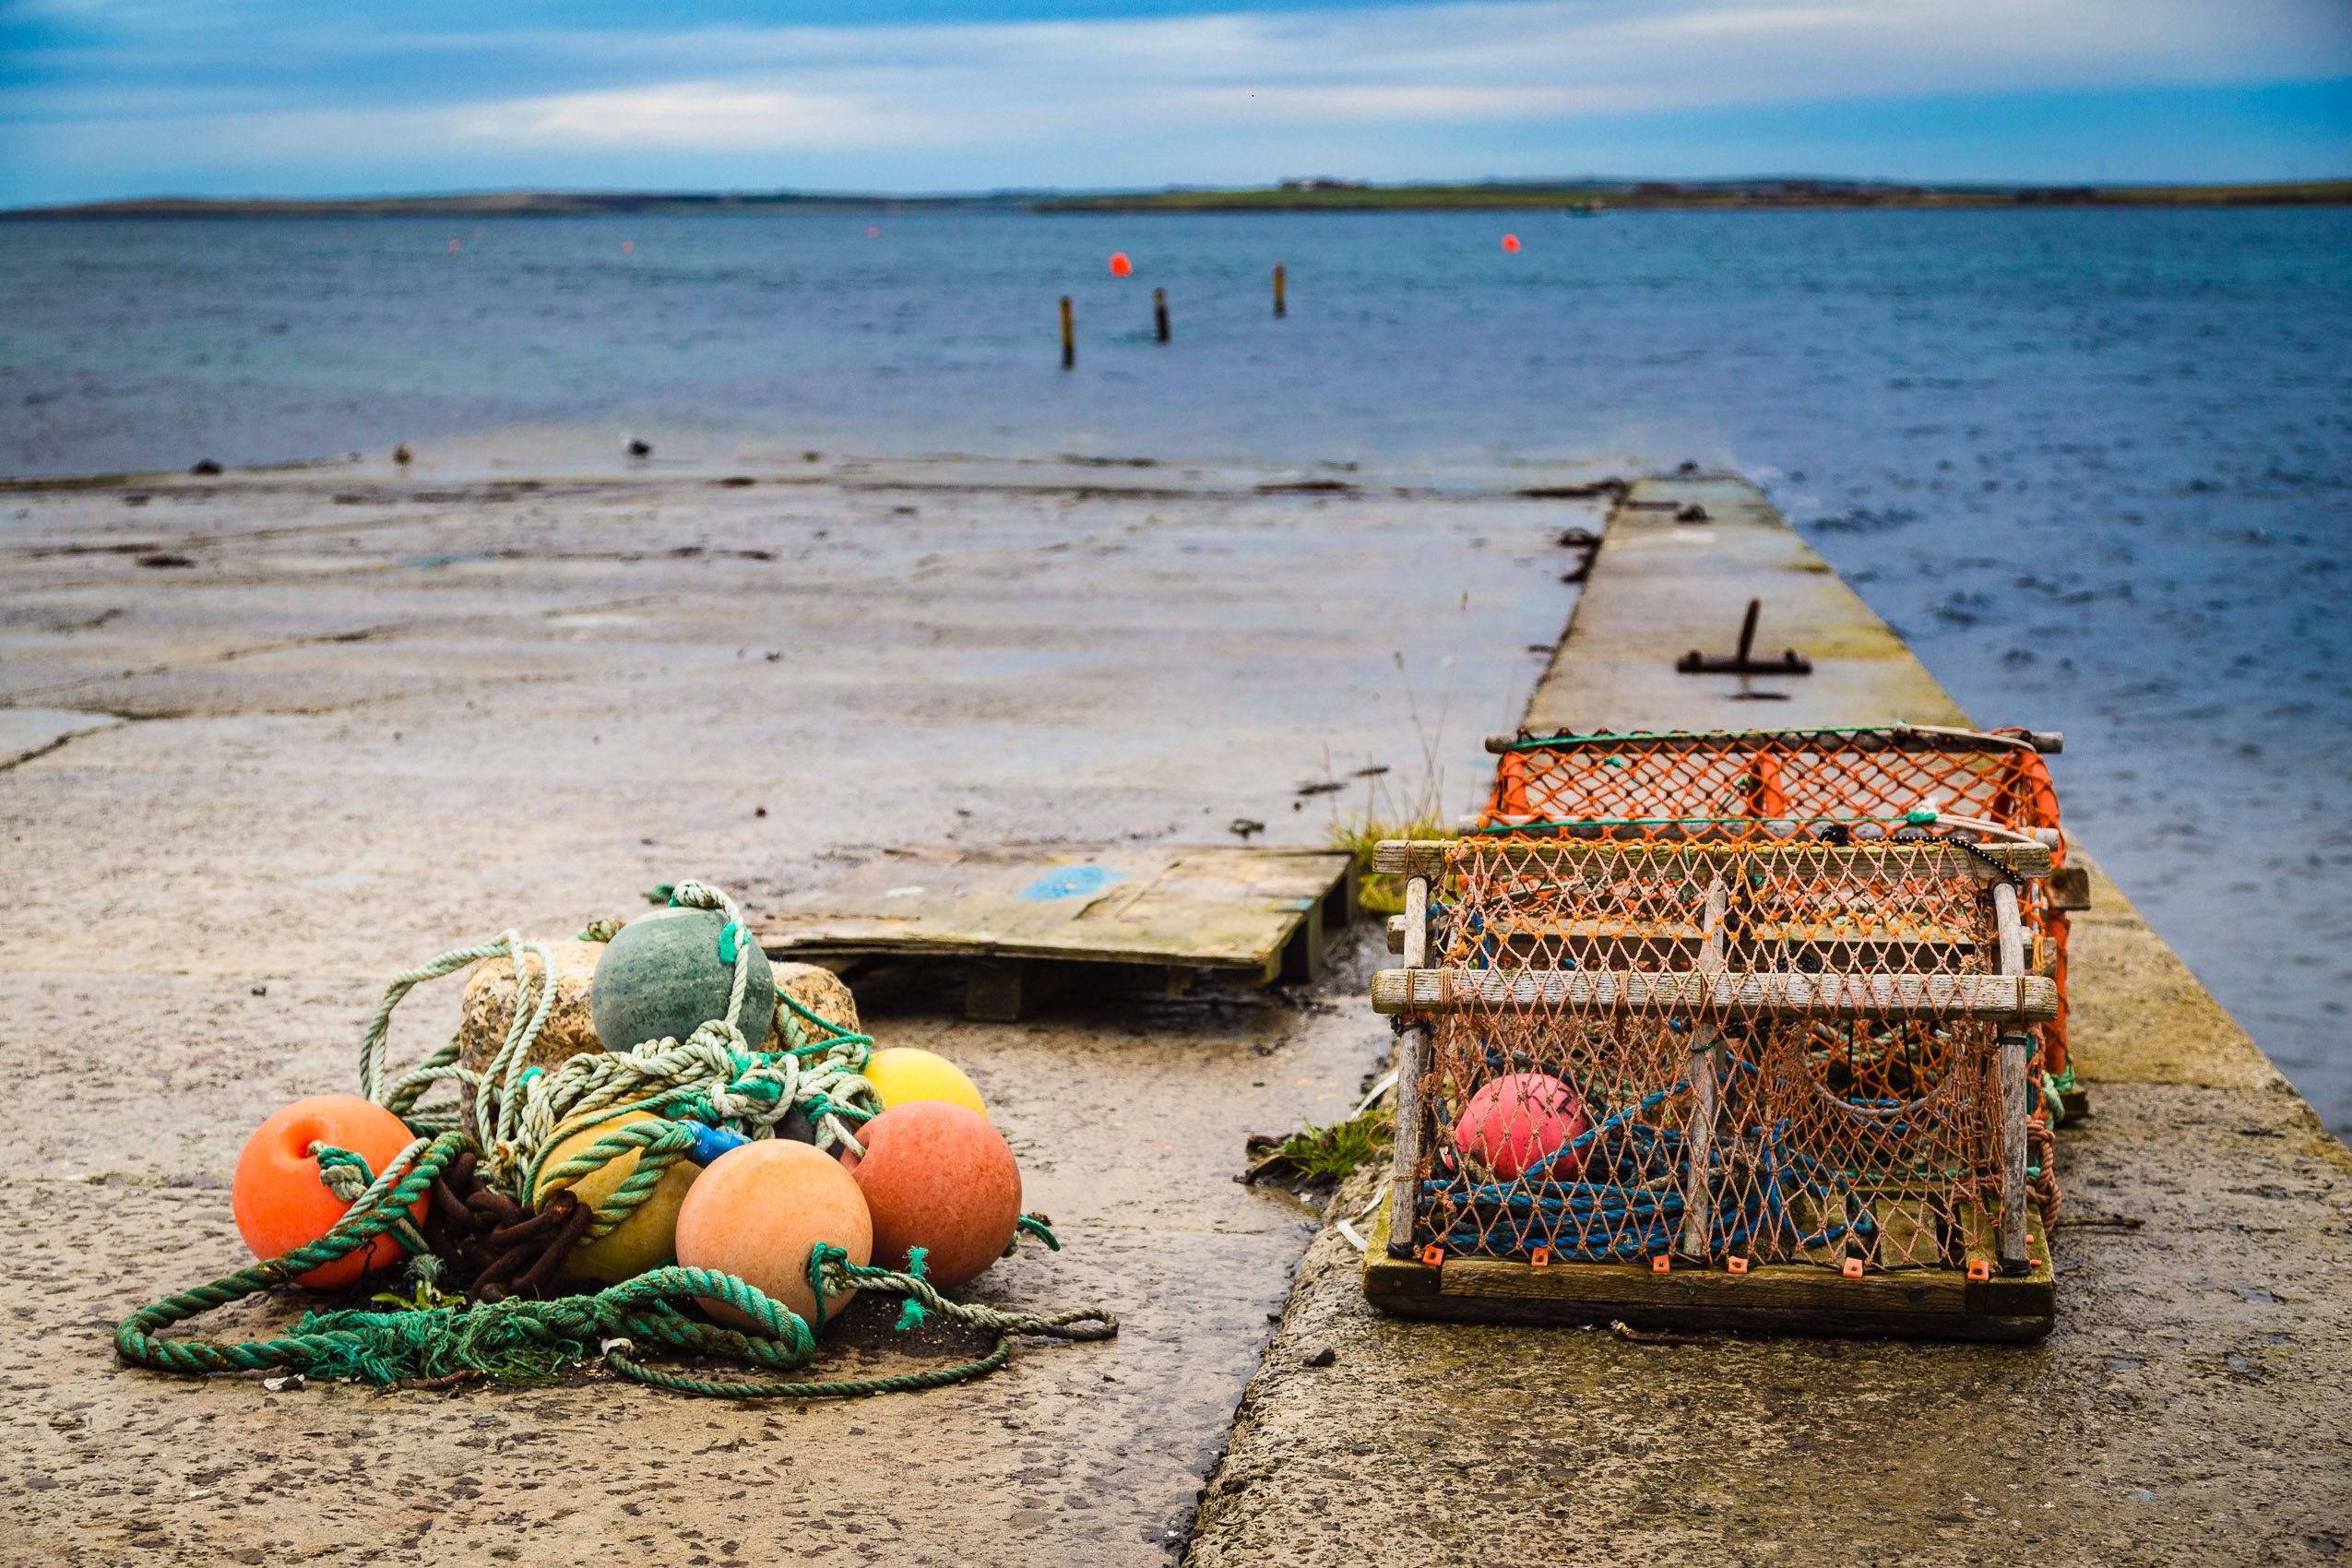 Lobster creels and buoys on a slipway in Kirkwall, Orkney Islands. OR029